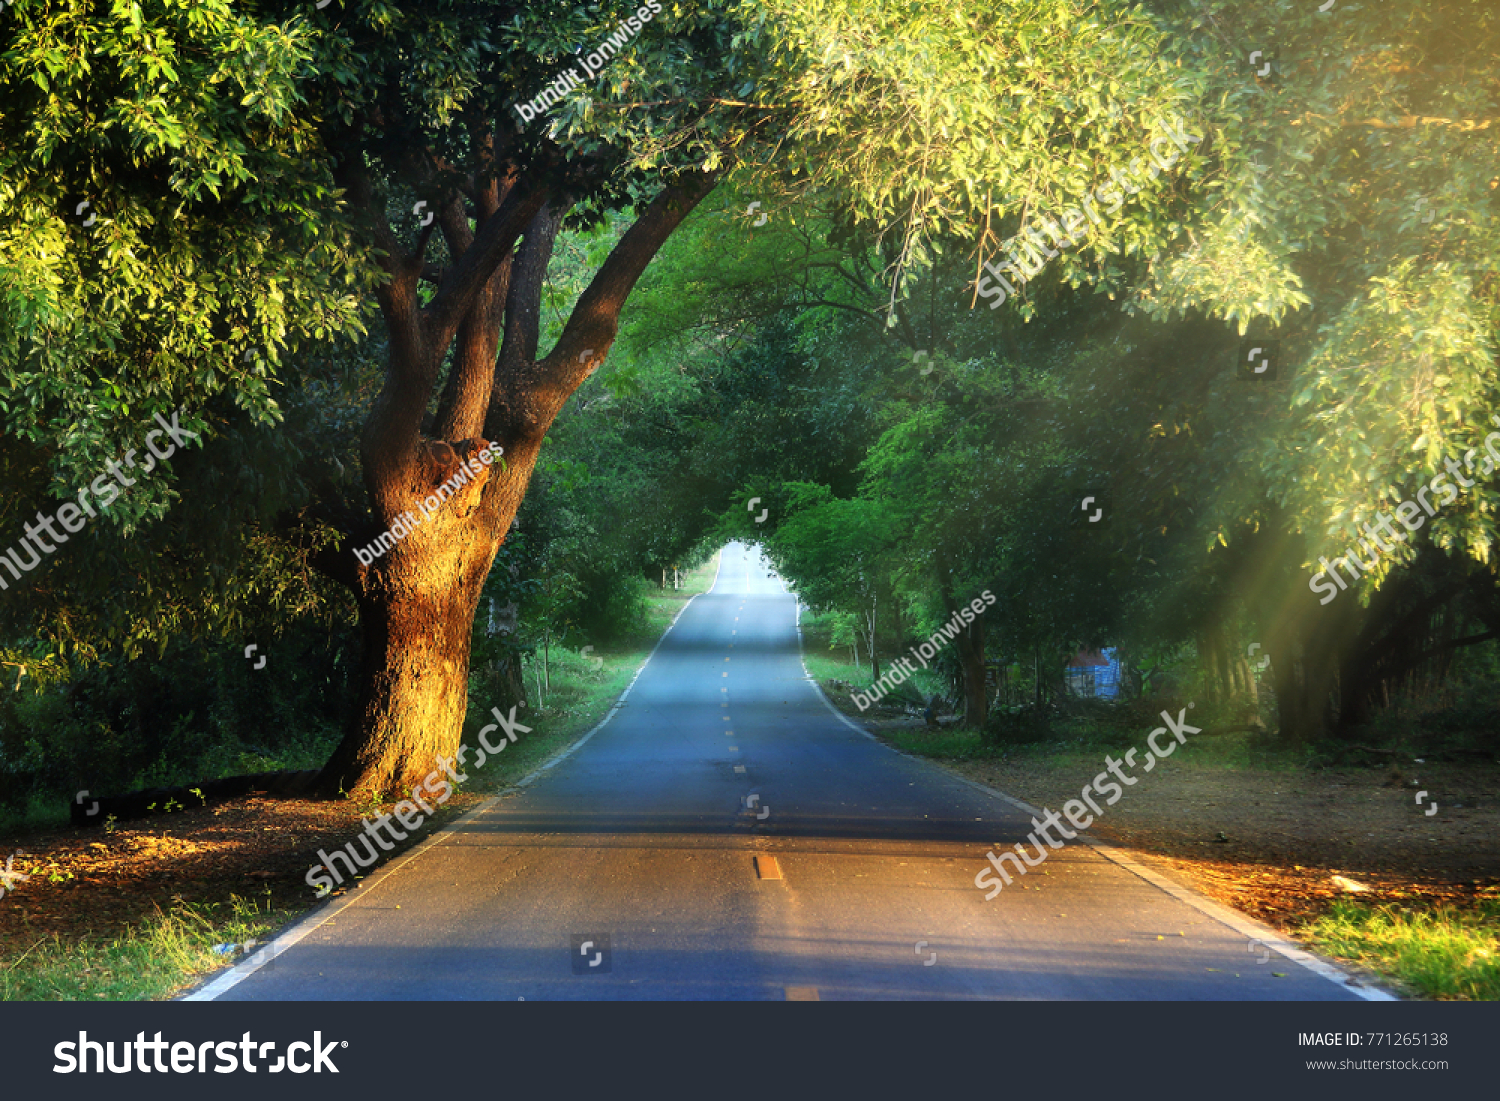 Natural Background Route Journey Amidst Big Stock Photo 771265138